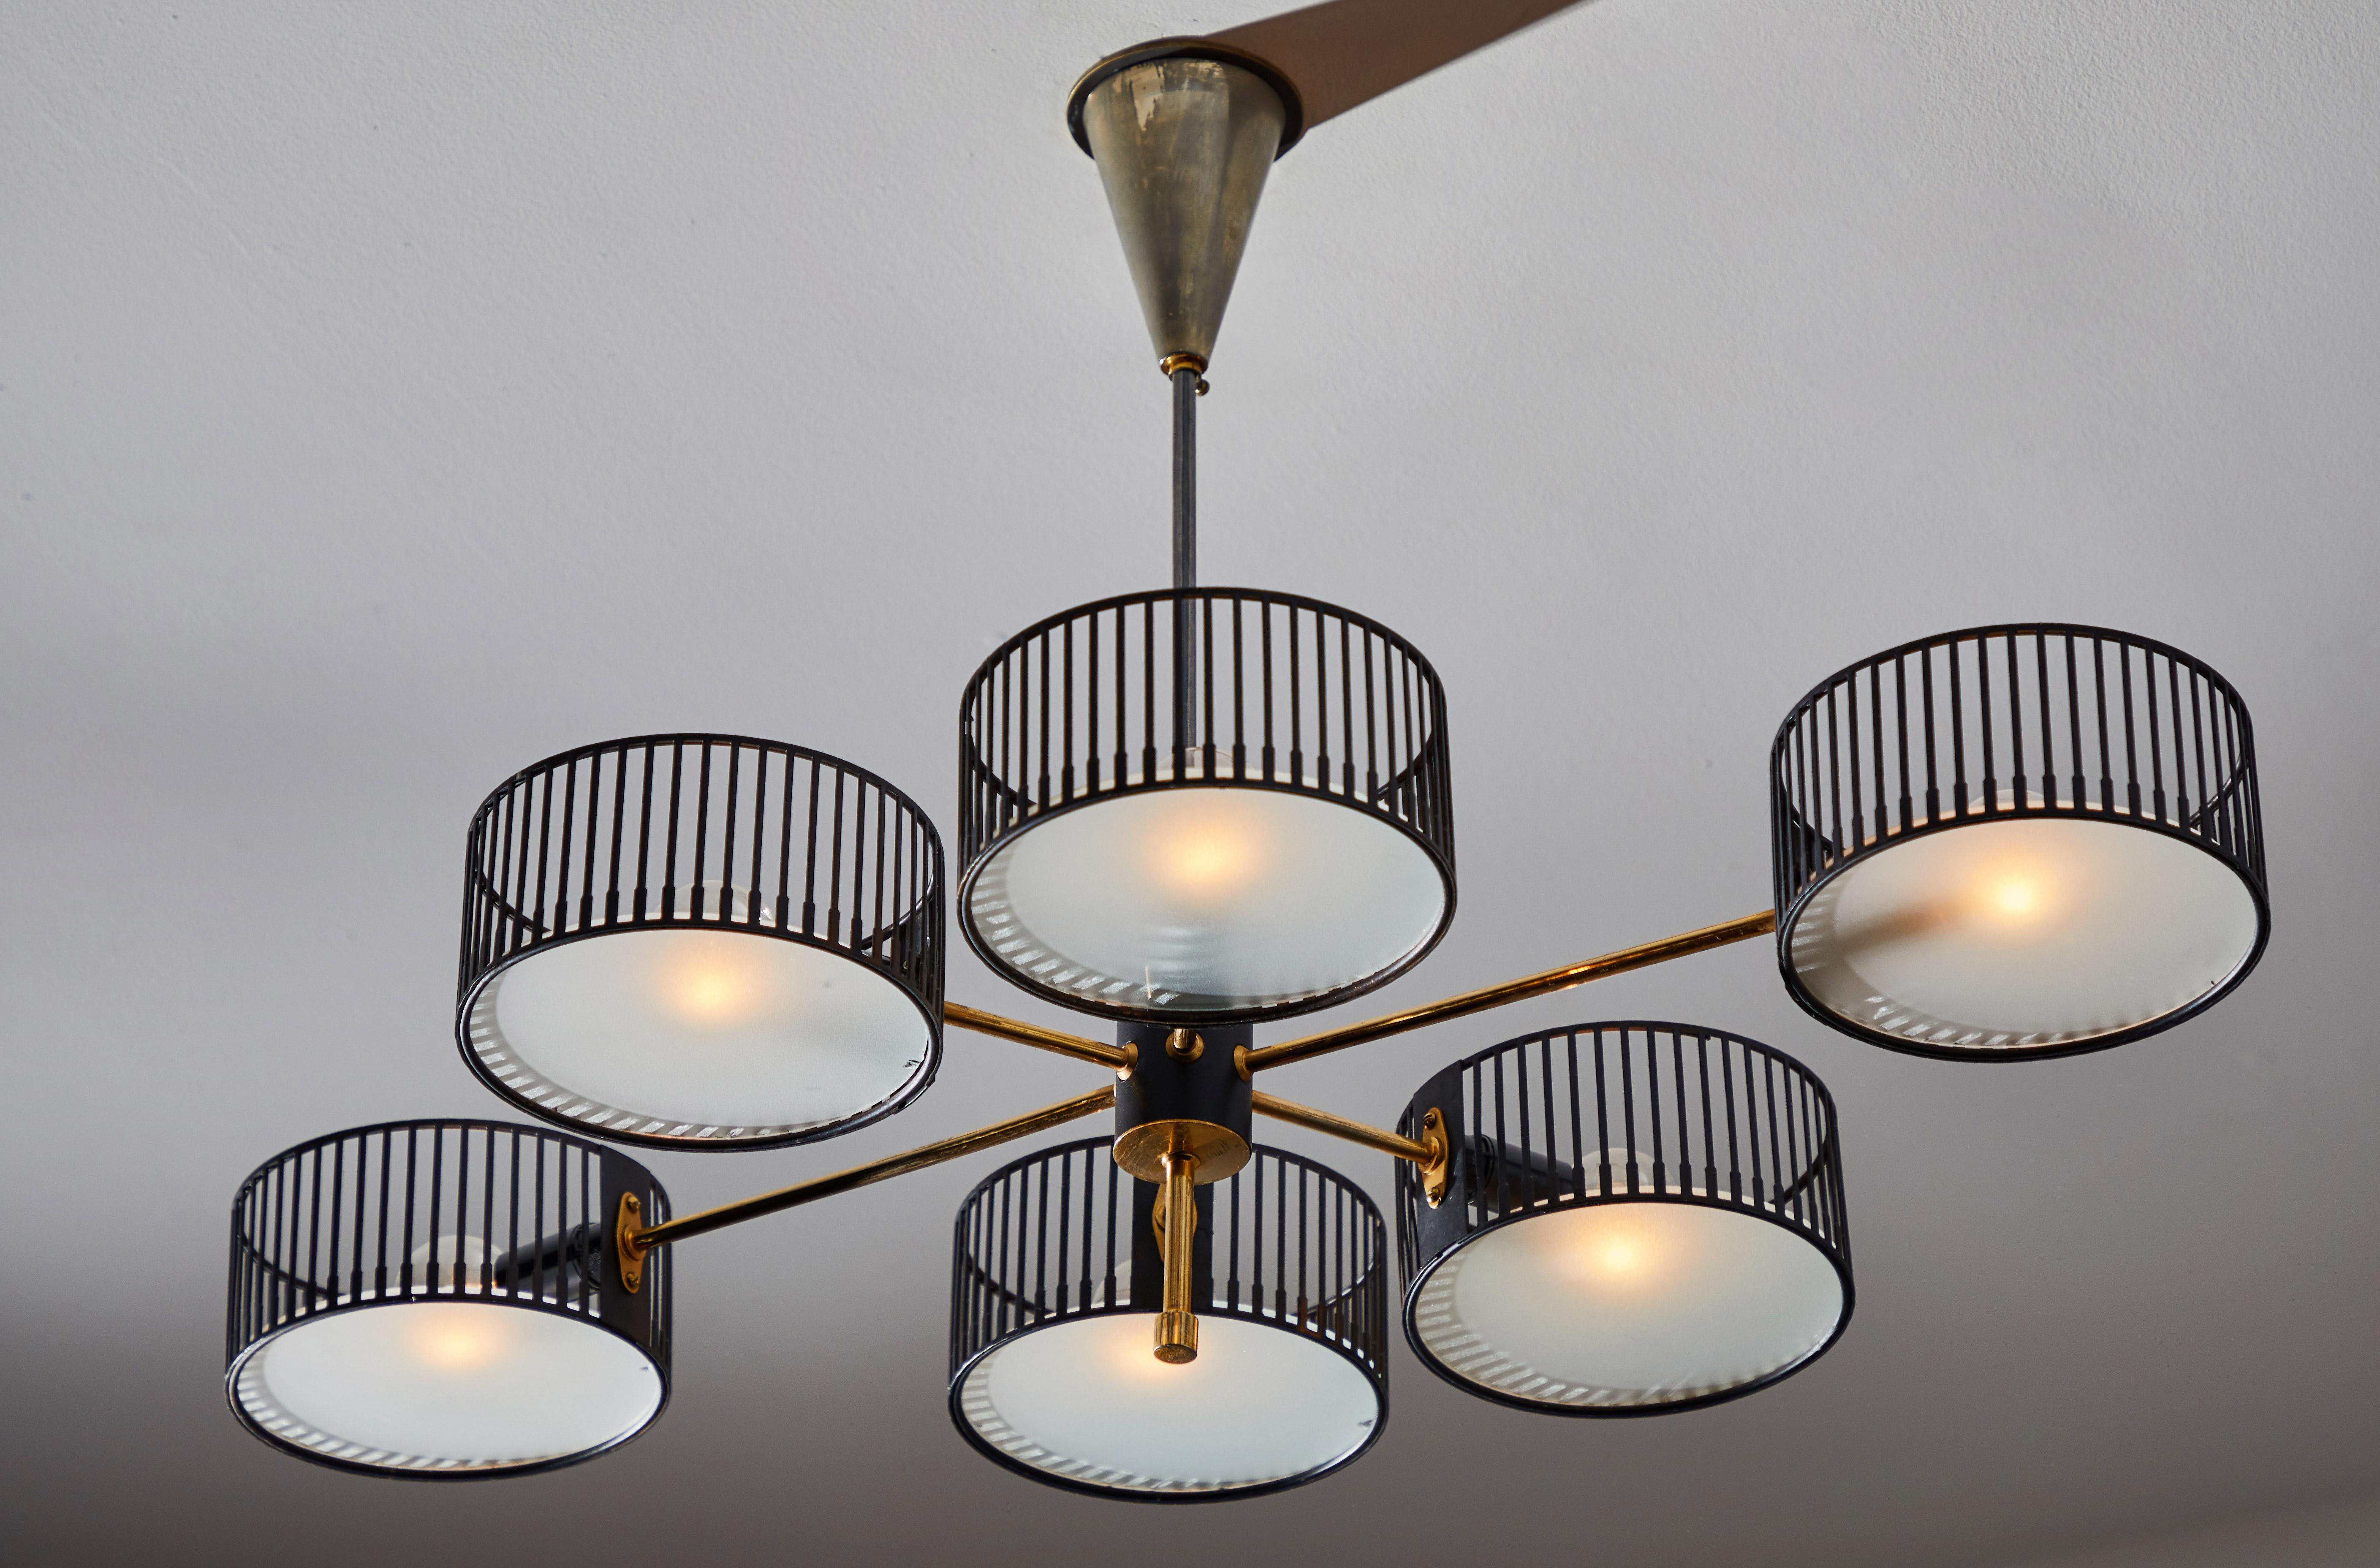 Chandelier by Lunel. Manufactured in France circa 1950s. Enameled metal, and opaline glass. Rewired for U.S. junction boxes. Original canopy with custom brass ceiling plate. Takes six E27 75w maximum bulbs. Bulbs provided as a one time courtesy.